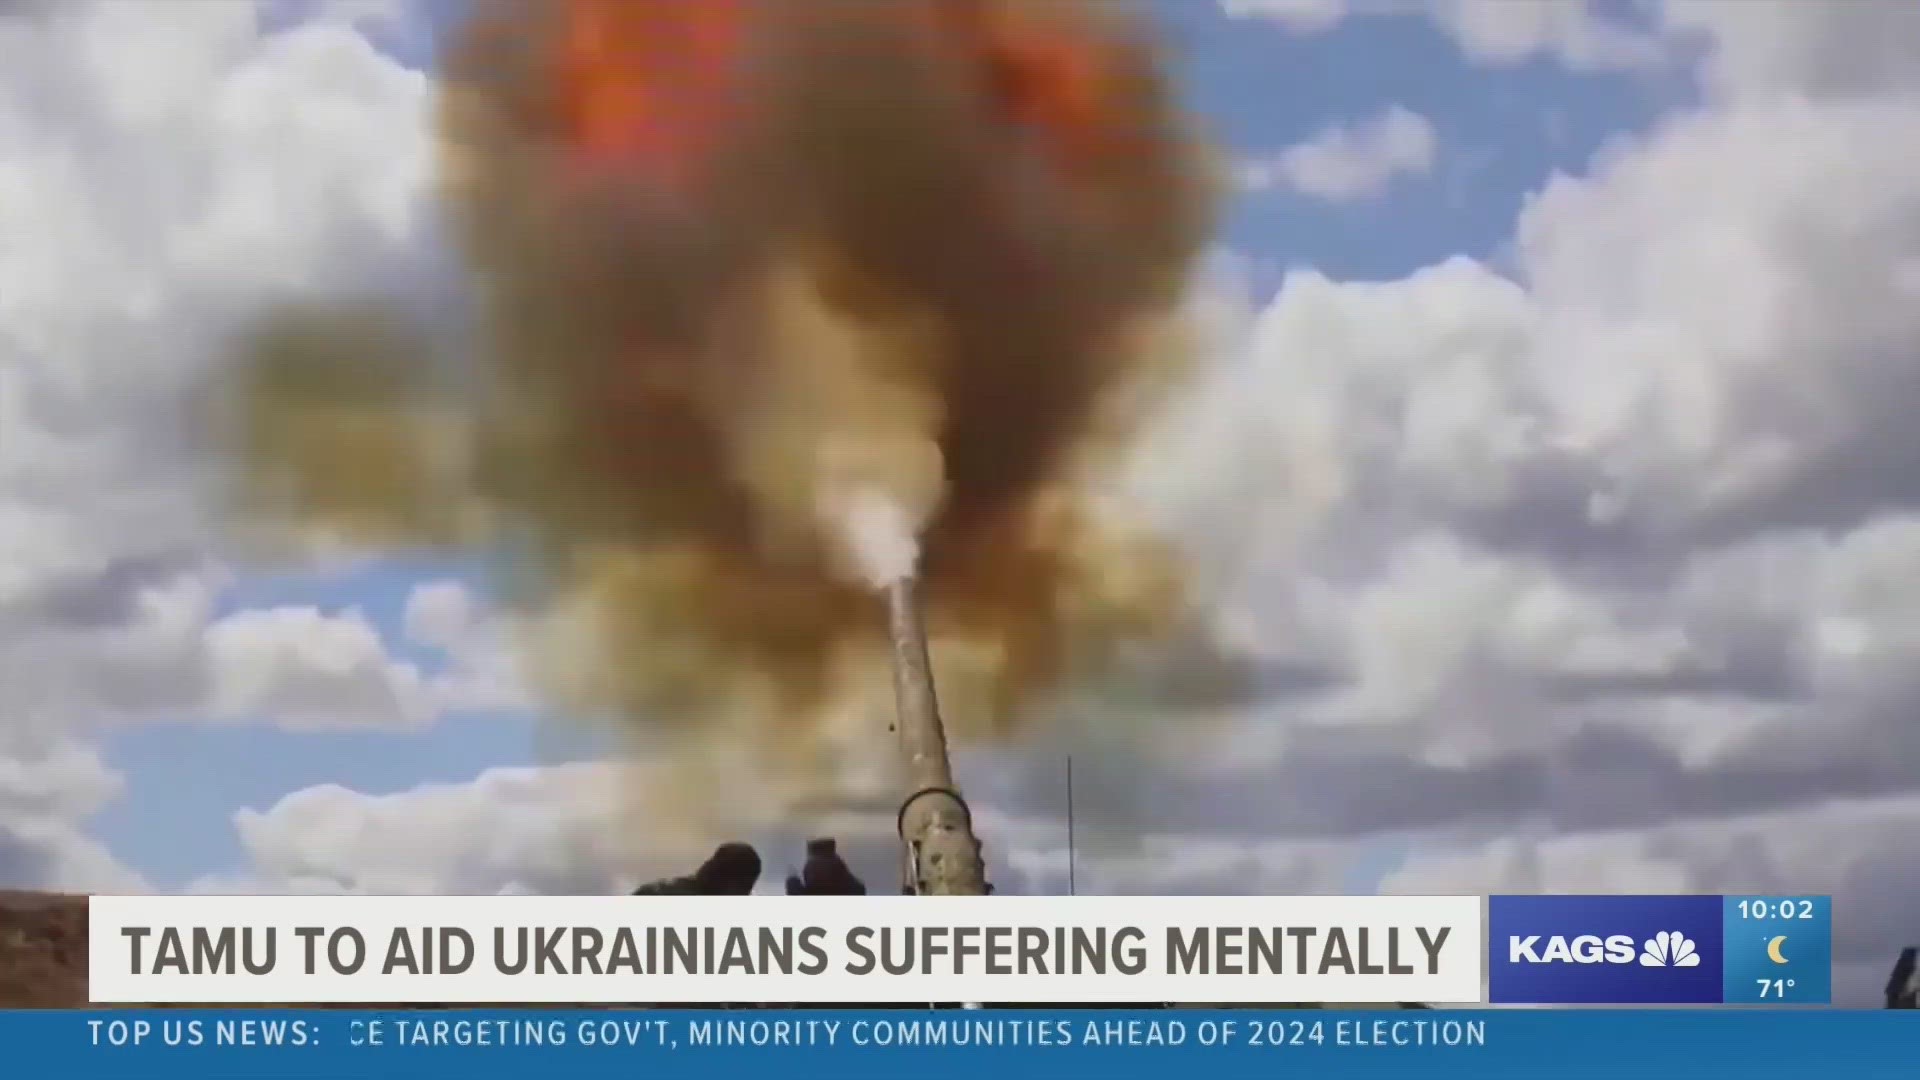 Thanks to an over $1 million fund from the national government, Texas A&M's School of Medicine will soon be aiding Ukrainians suffering from mental health issues.